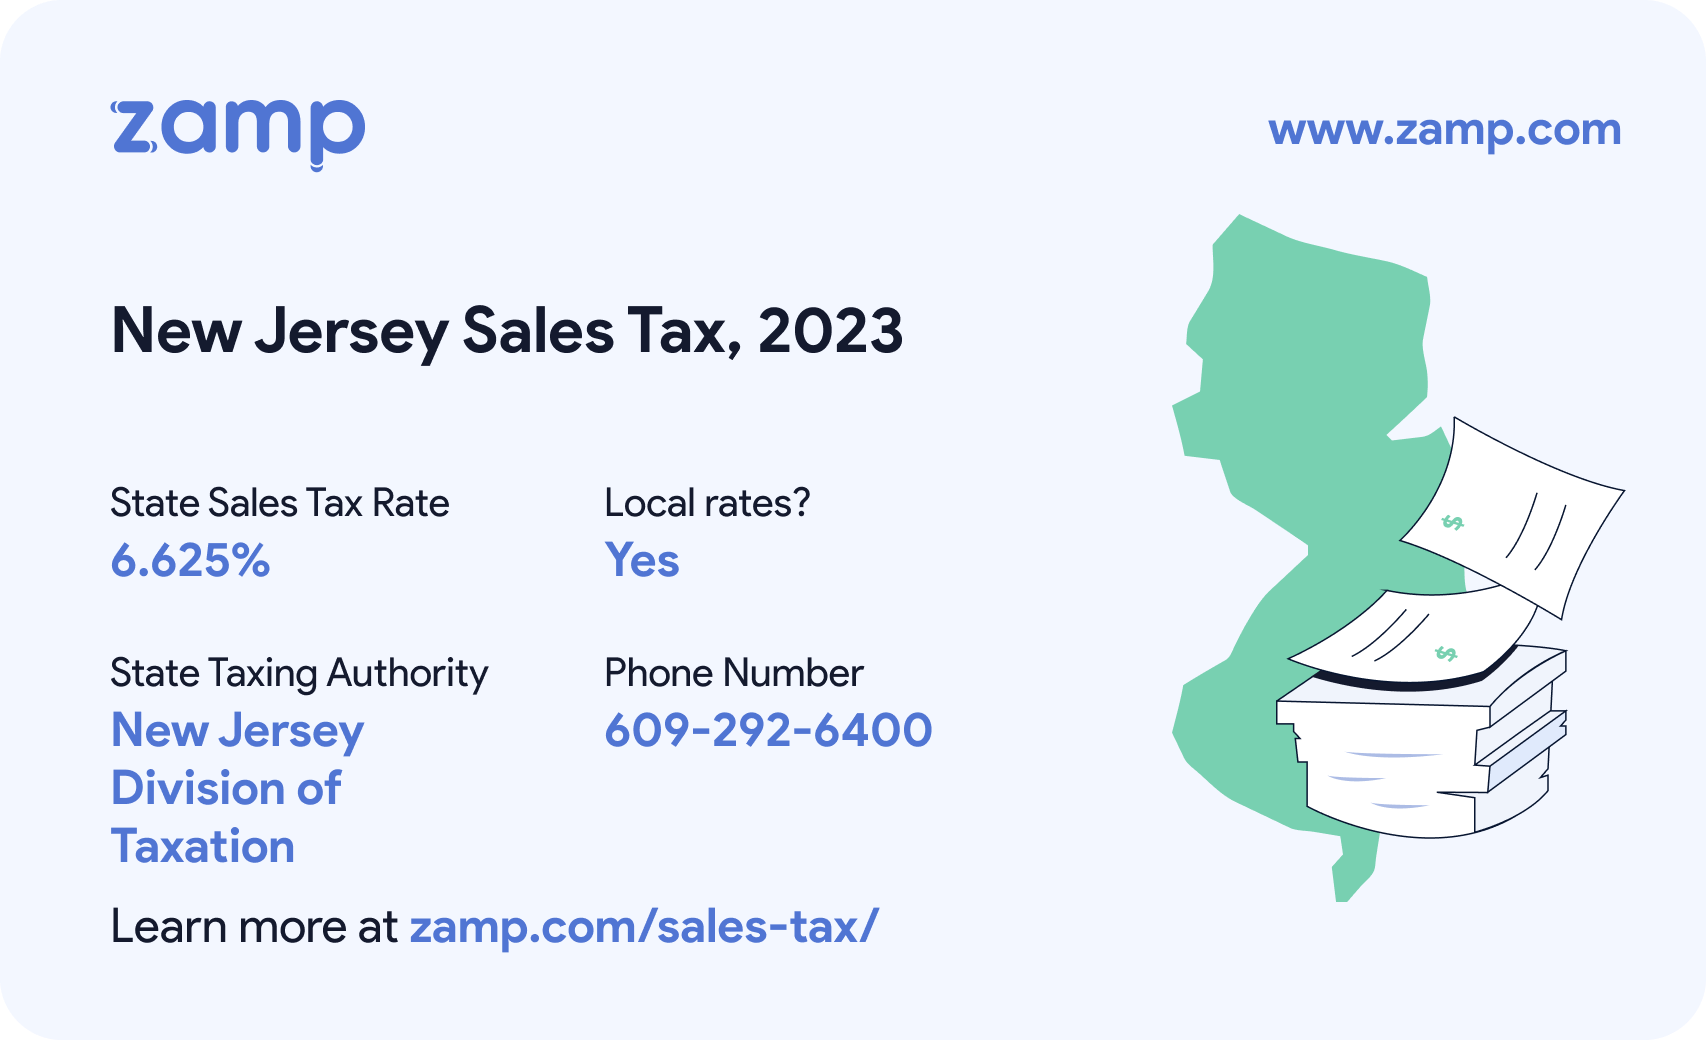 New Jersey basic sales tax info for 2023 - State sales tax rate: 6.625%, Local rates? Yes; State Taxing Authority: New Jersey Division of Taxation; and phone number 609-292-6400